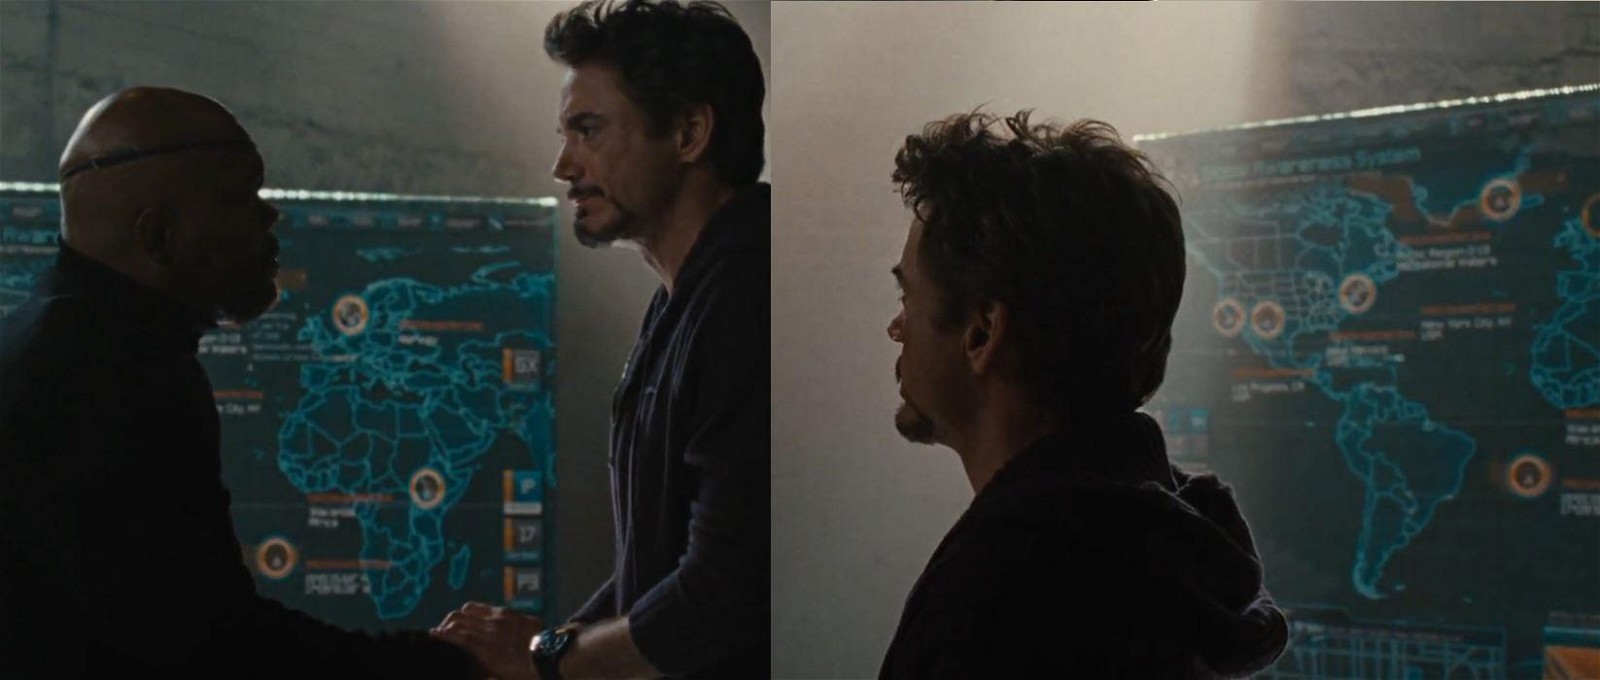 The screen pinpointed the location of Wakanda in Iron Man 2 (2010)